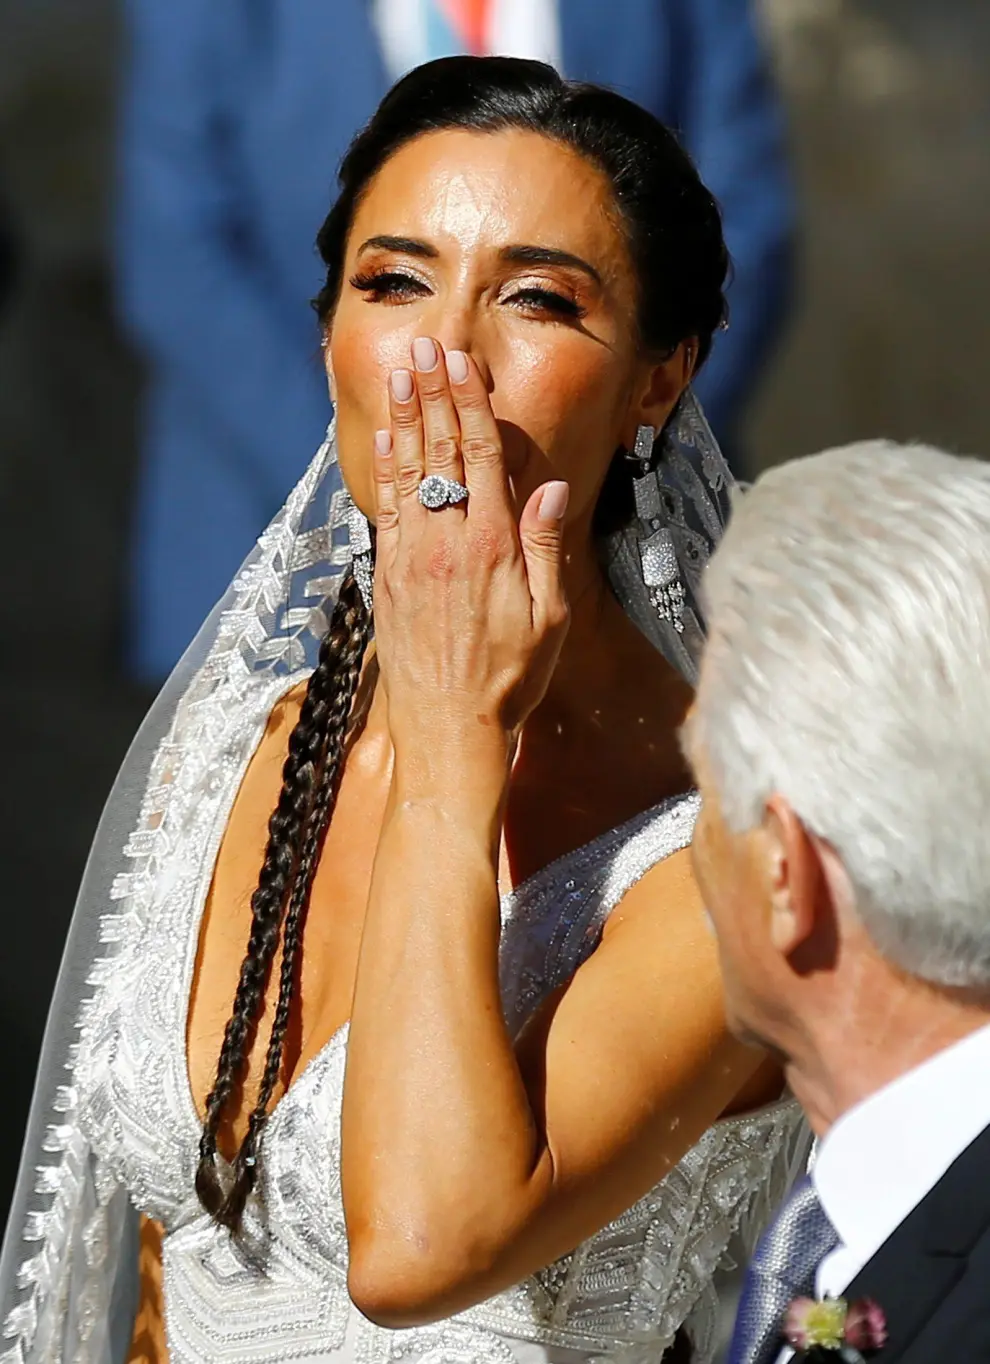 Real Madrid captain Sergio Ramos and his wife Pilar Rubio kiss after their wedding at the cathedral in Seville, Spain June 15, 2019. REUTERS/Marcelo del Pozo [[[REUTERS VOCENTO]]] SOCCER-SPAIN/RAMOS-WEDDING